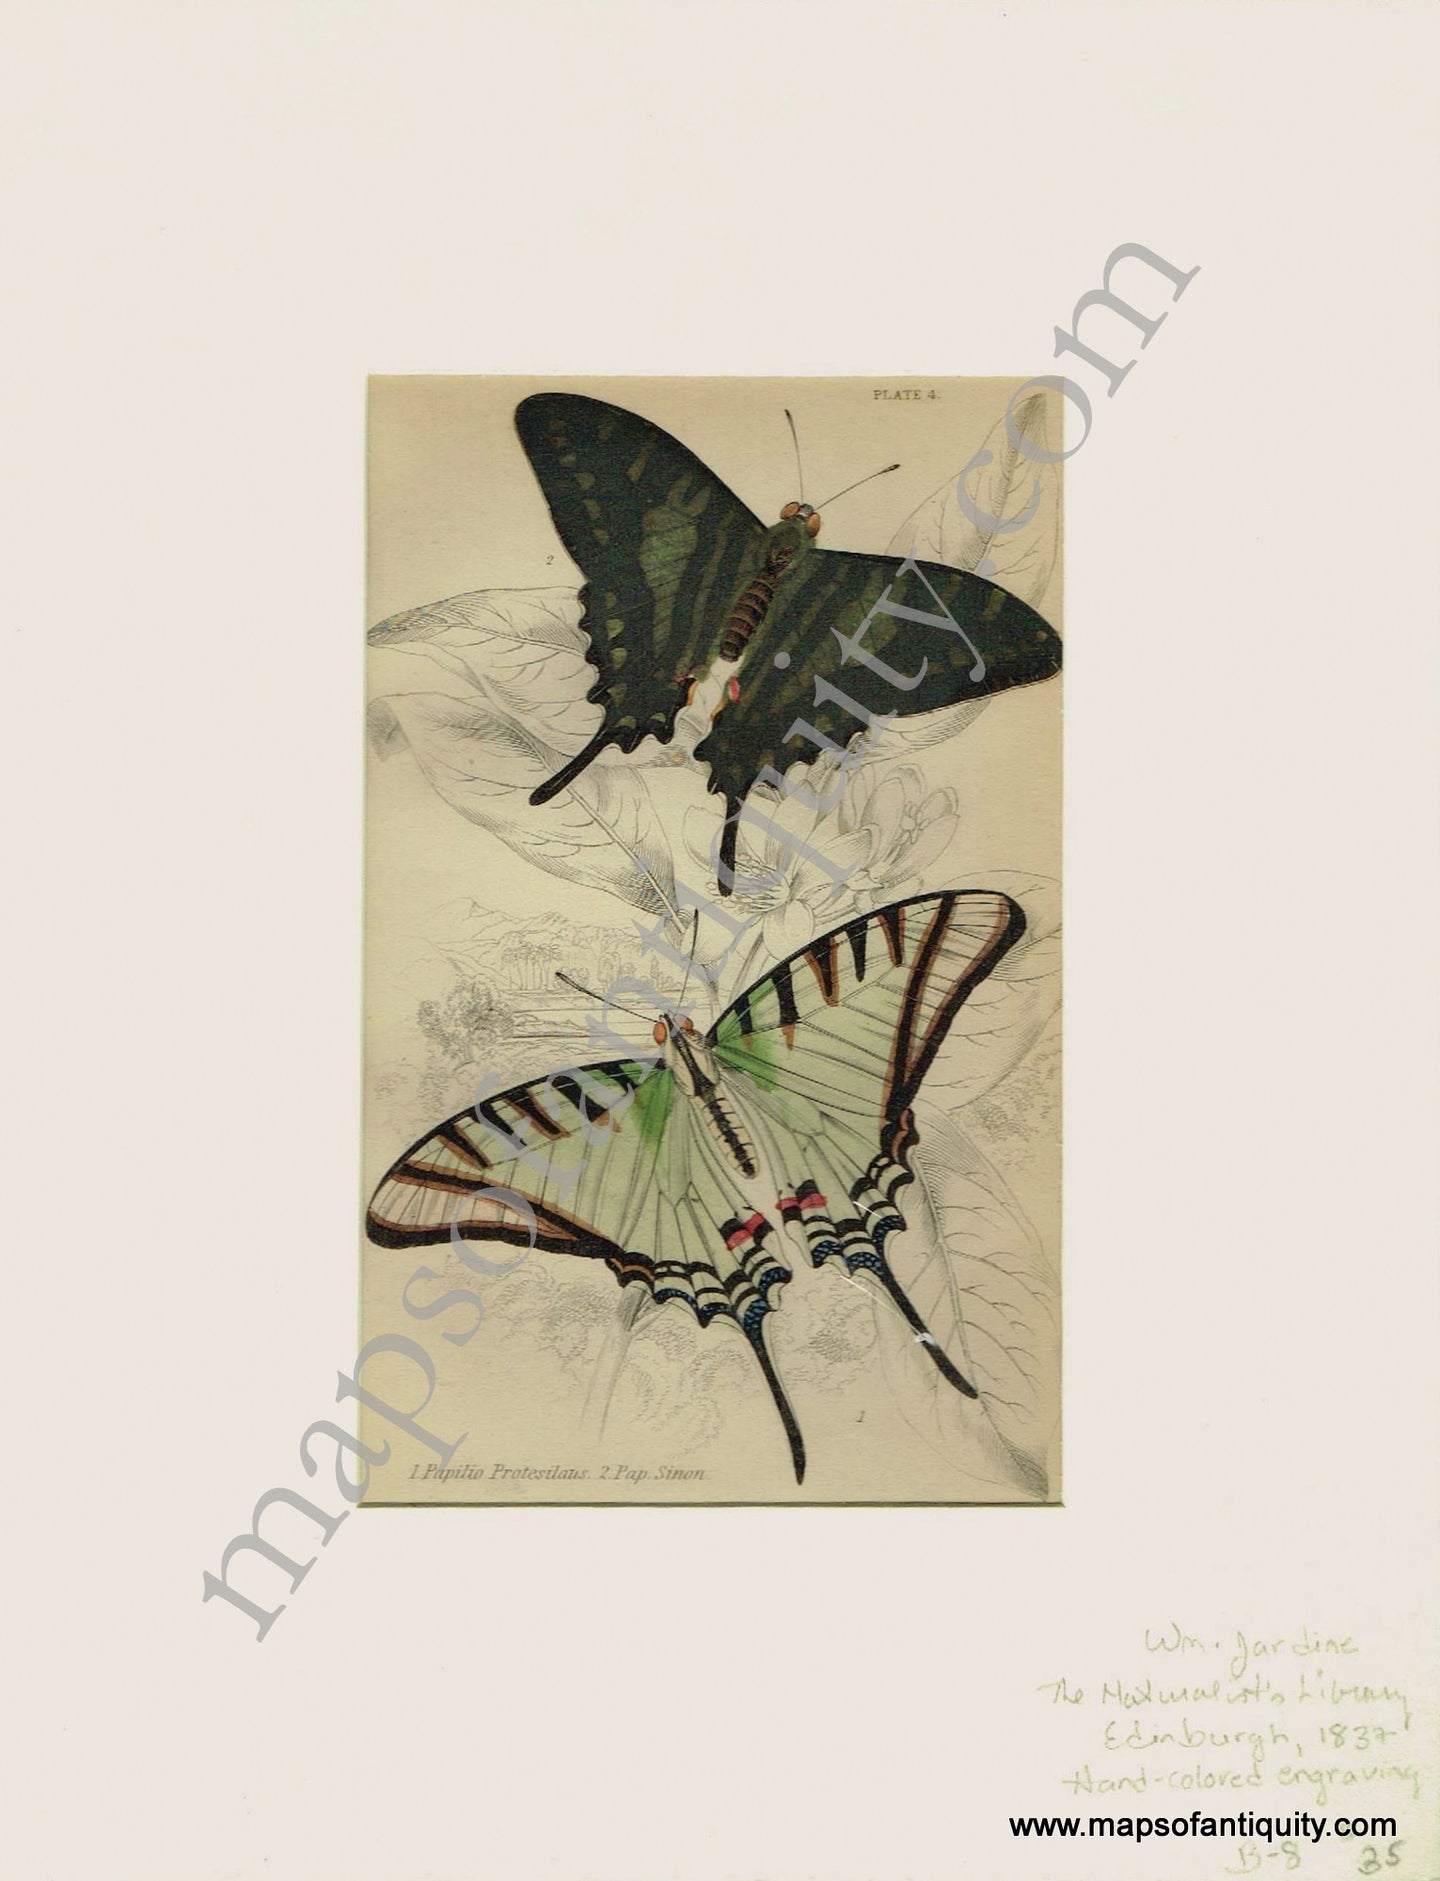 Antique-Print-Prints-Illustration-Illustrations-Engraved-Engraving-Engravings-Papilio-Protesilaus-Pap-Sinon-Butterfly-Butterflies-Insects-Bugs-Natural-History-Diagram-Diagrams-Naturalist's-Library-Jardine-1837-1830s-1800s-Early-Mid-19th-Century-Maps-of-Antiquity